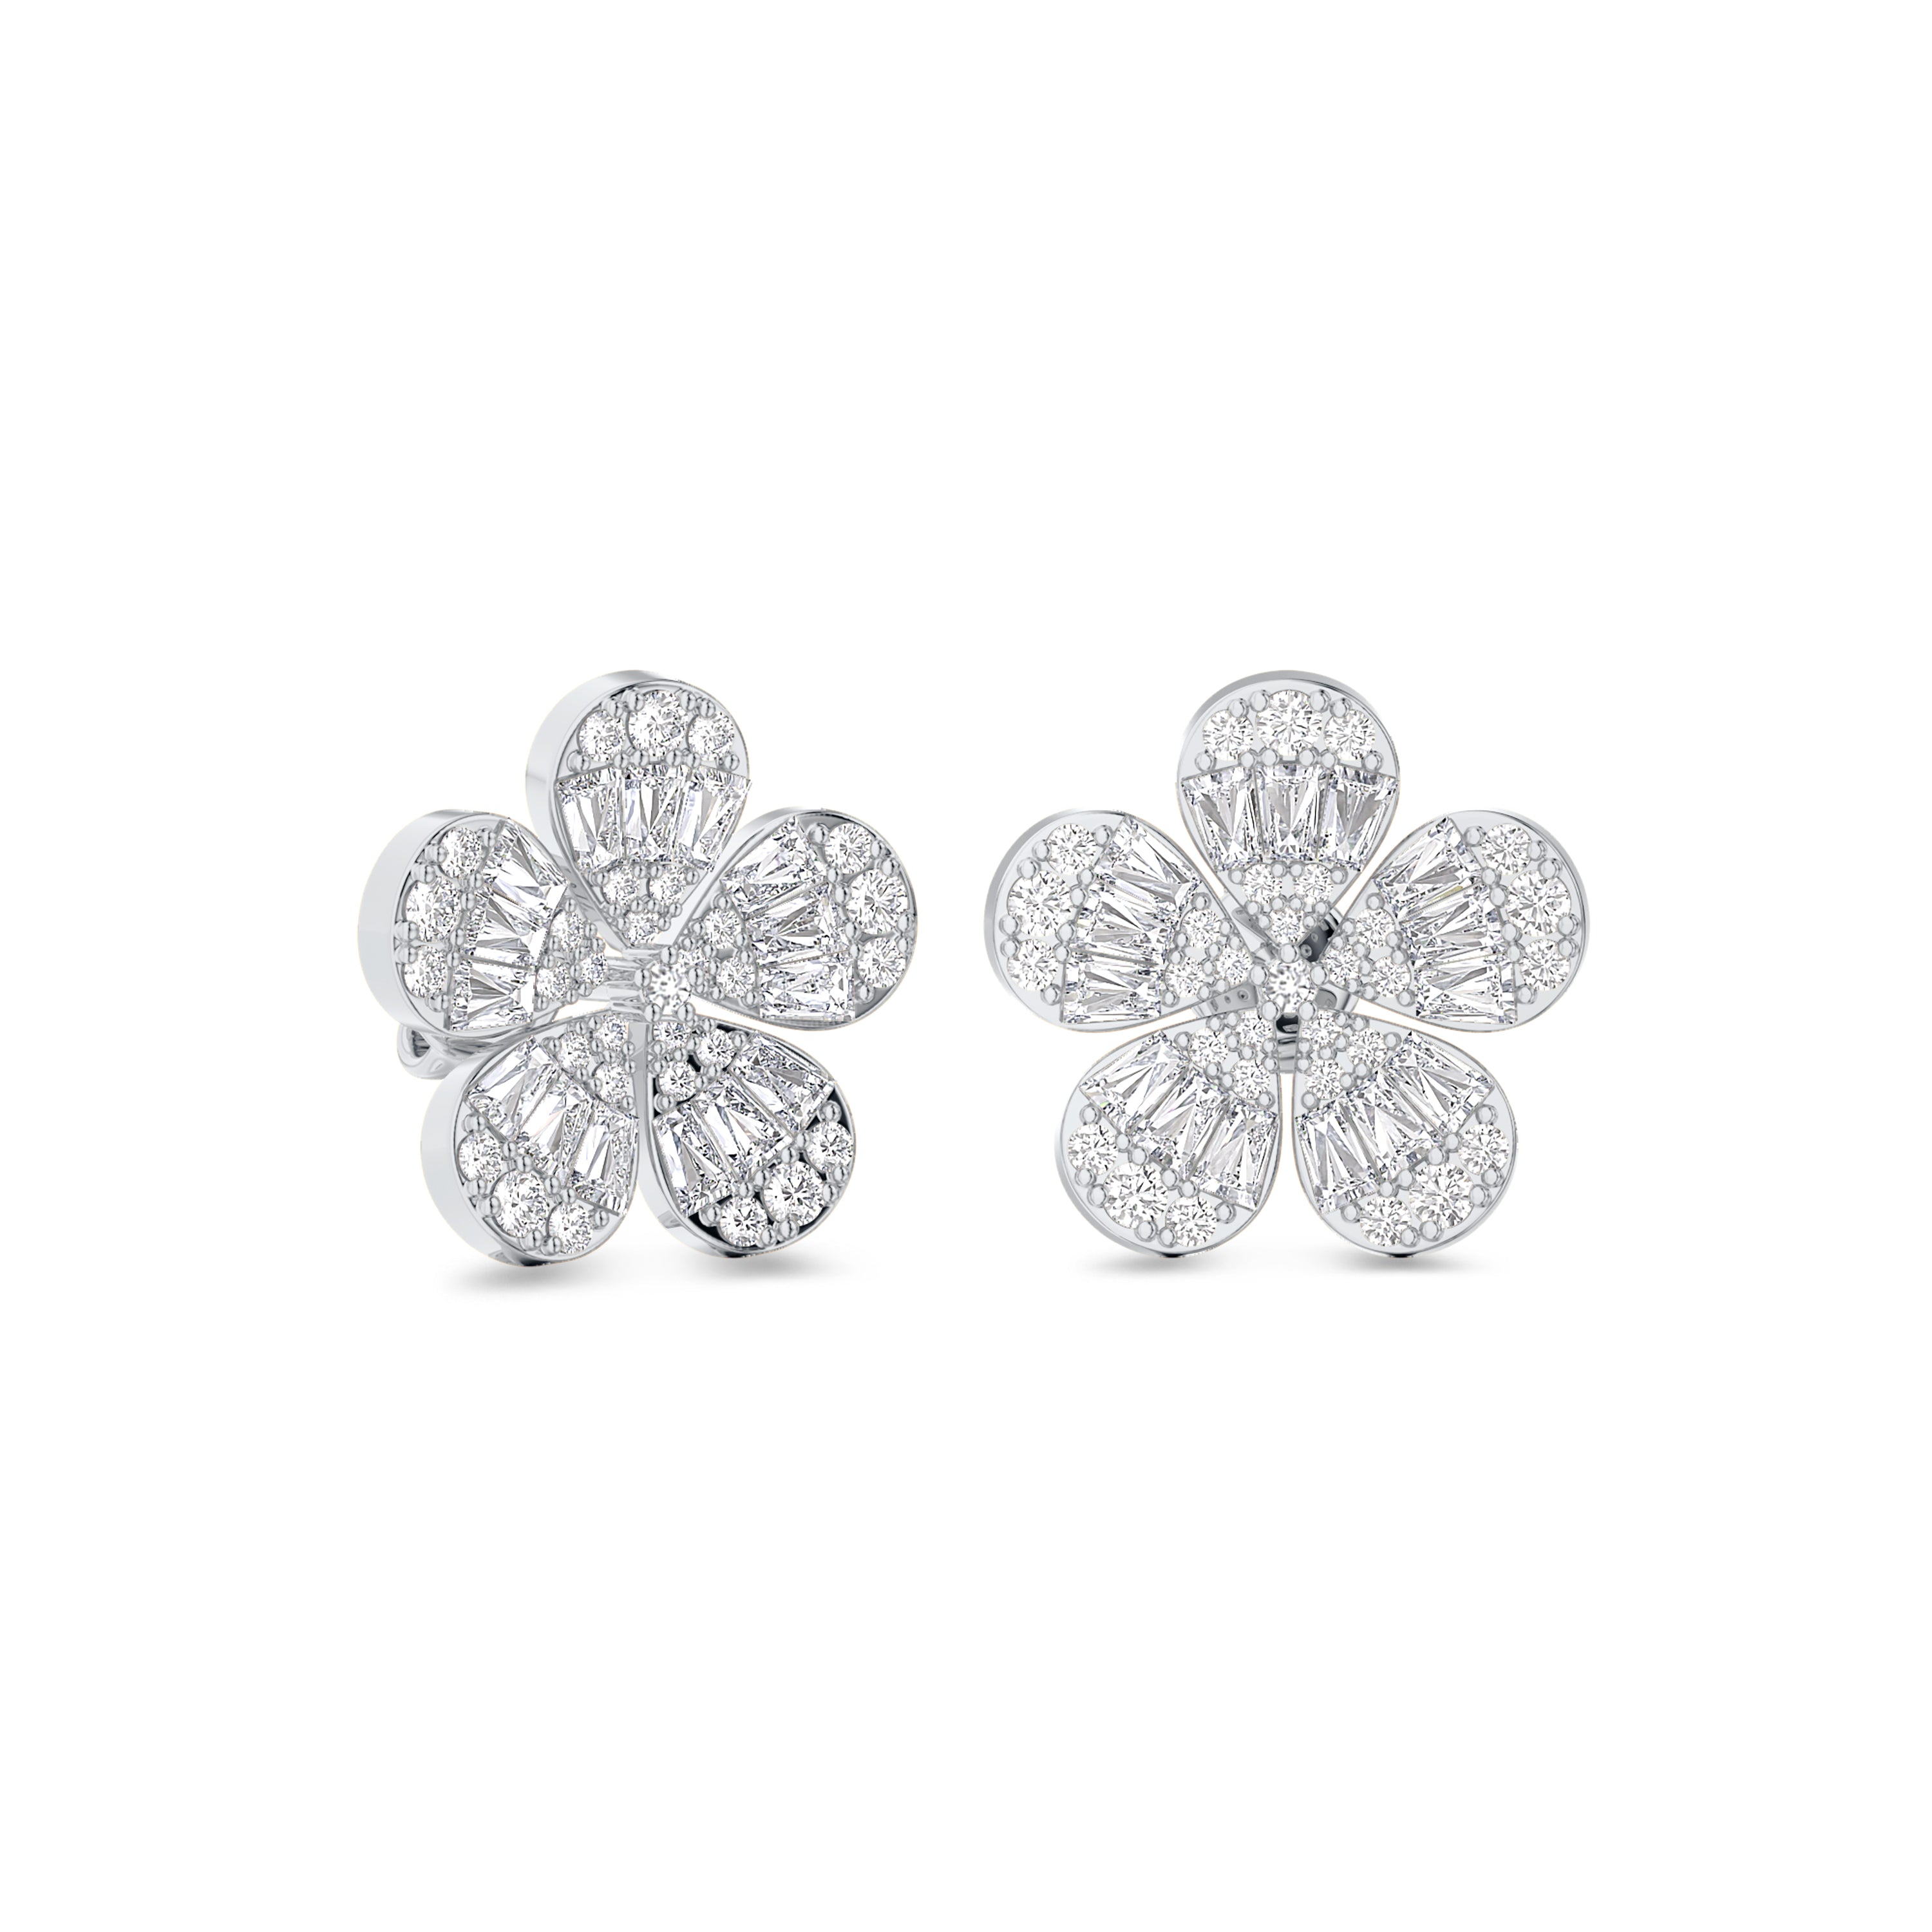 Flower diamond earring in 18K white gold, FG color and VS-SI clarity, 1.05 carat